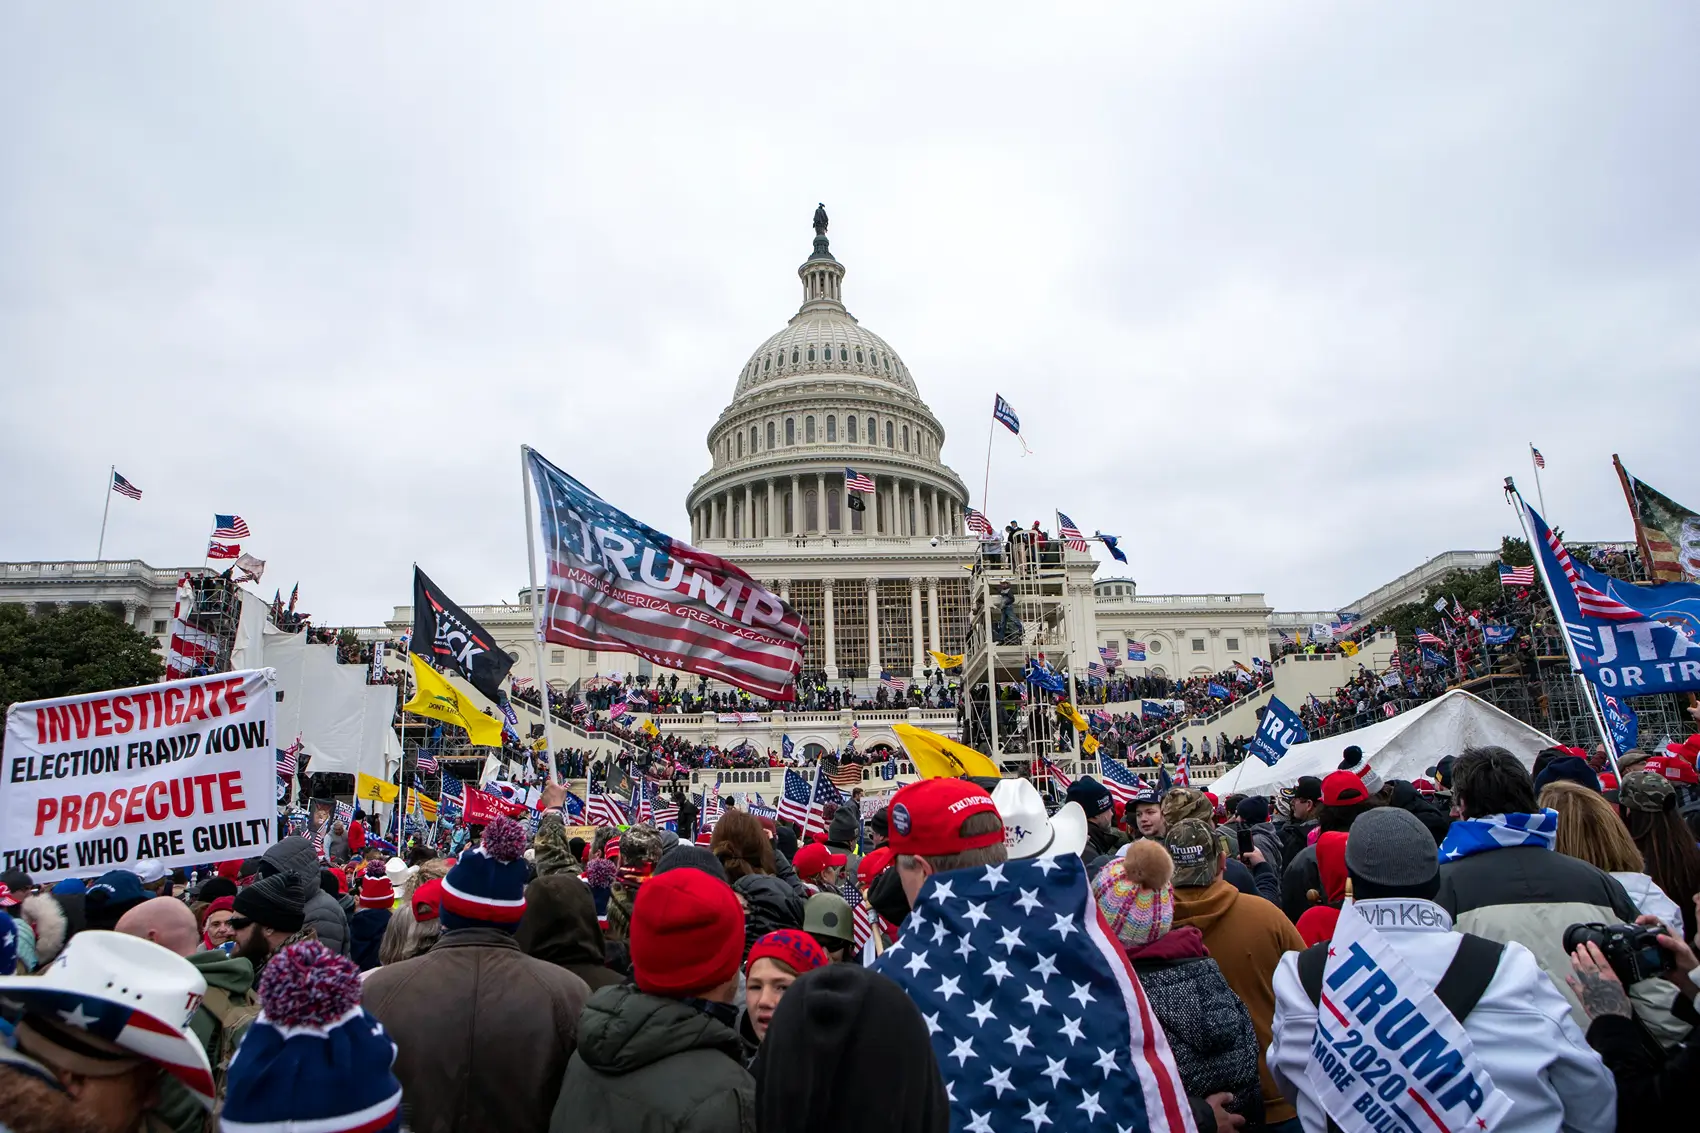 A Katy man, Adam Lejay Jackson, pleaded guilty to assaulting police during the Jan. 6 attack on the U.S. Capitol by supporters of former President Donald Trump.